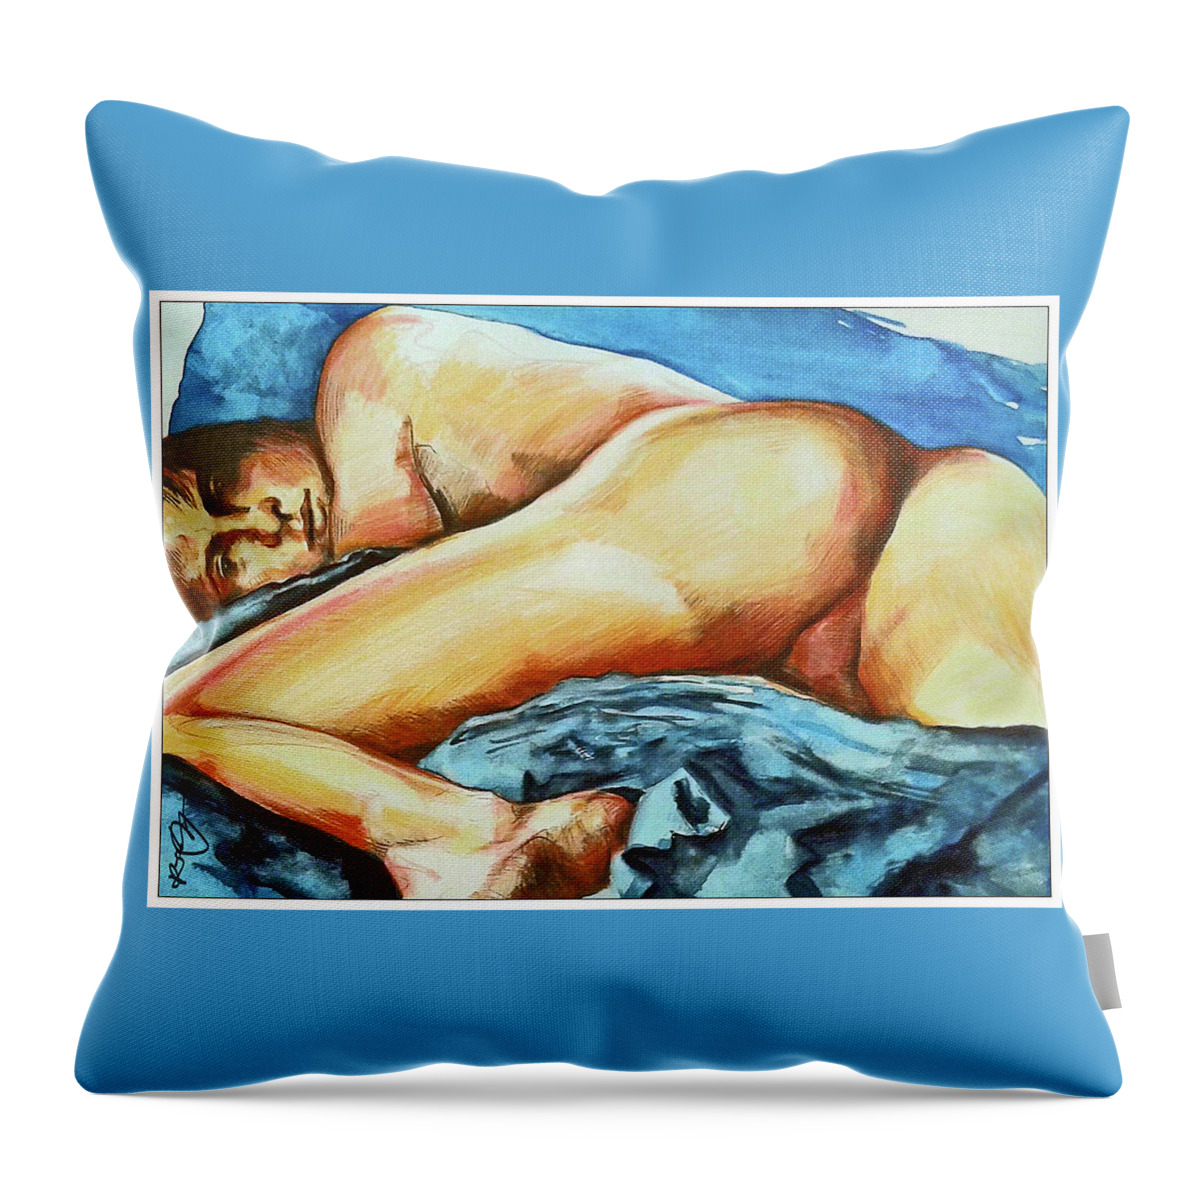 Naked Boy Throw Pillow featuring the painting Naked Bare Truth by Rene Capone